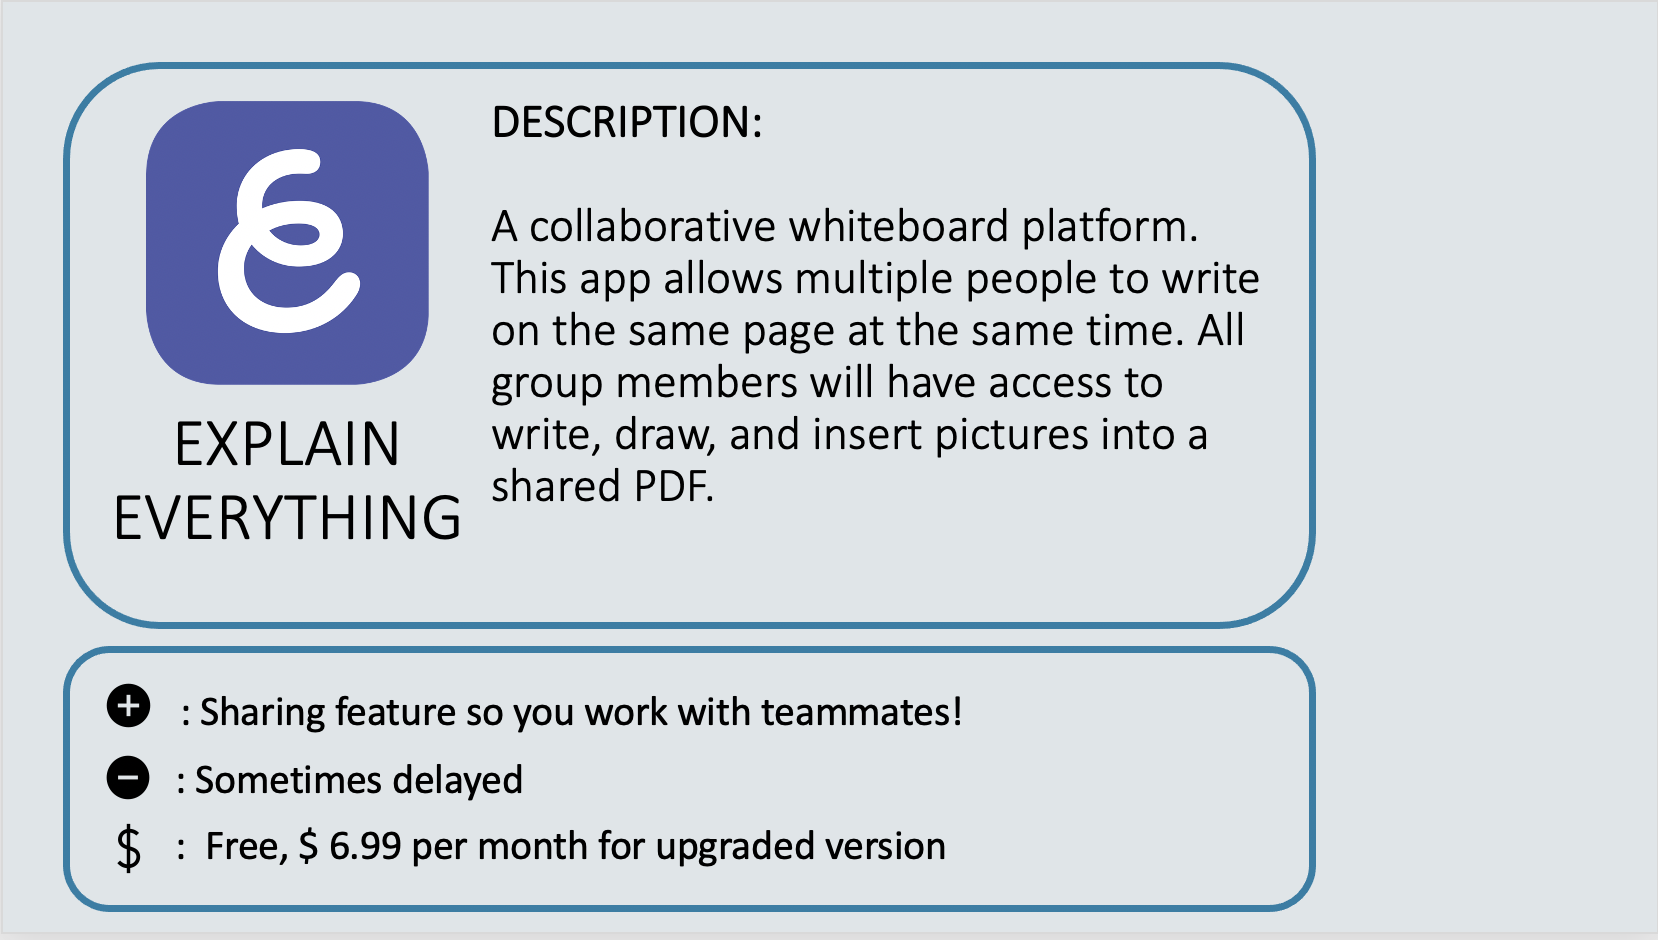 EXPLAIN EVERYTHING - A collaborative whiteboard platform. This app allows multiple people to write on the same page at the same time. All group members will have access to write, draw, and insert pictures into a shared PDF. Positive: Sharing feature so you work with teammates! Negative: Sometimes delayed. Cost: Free, $6.99 per month for upgraded version.